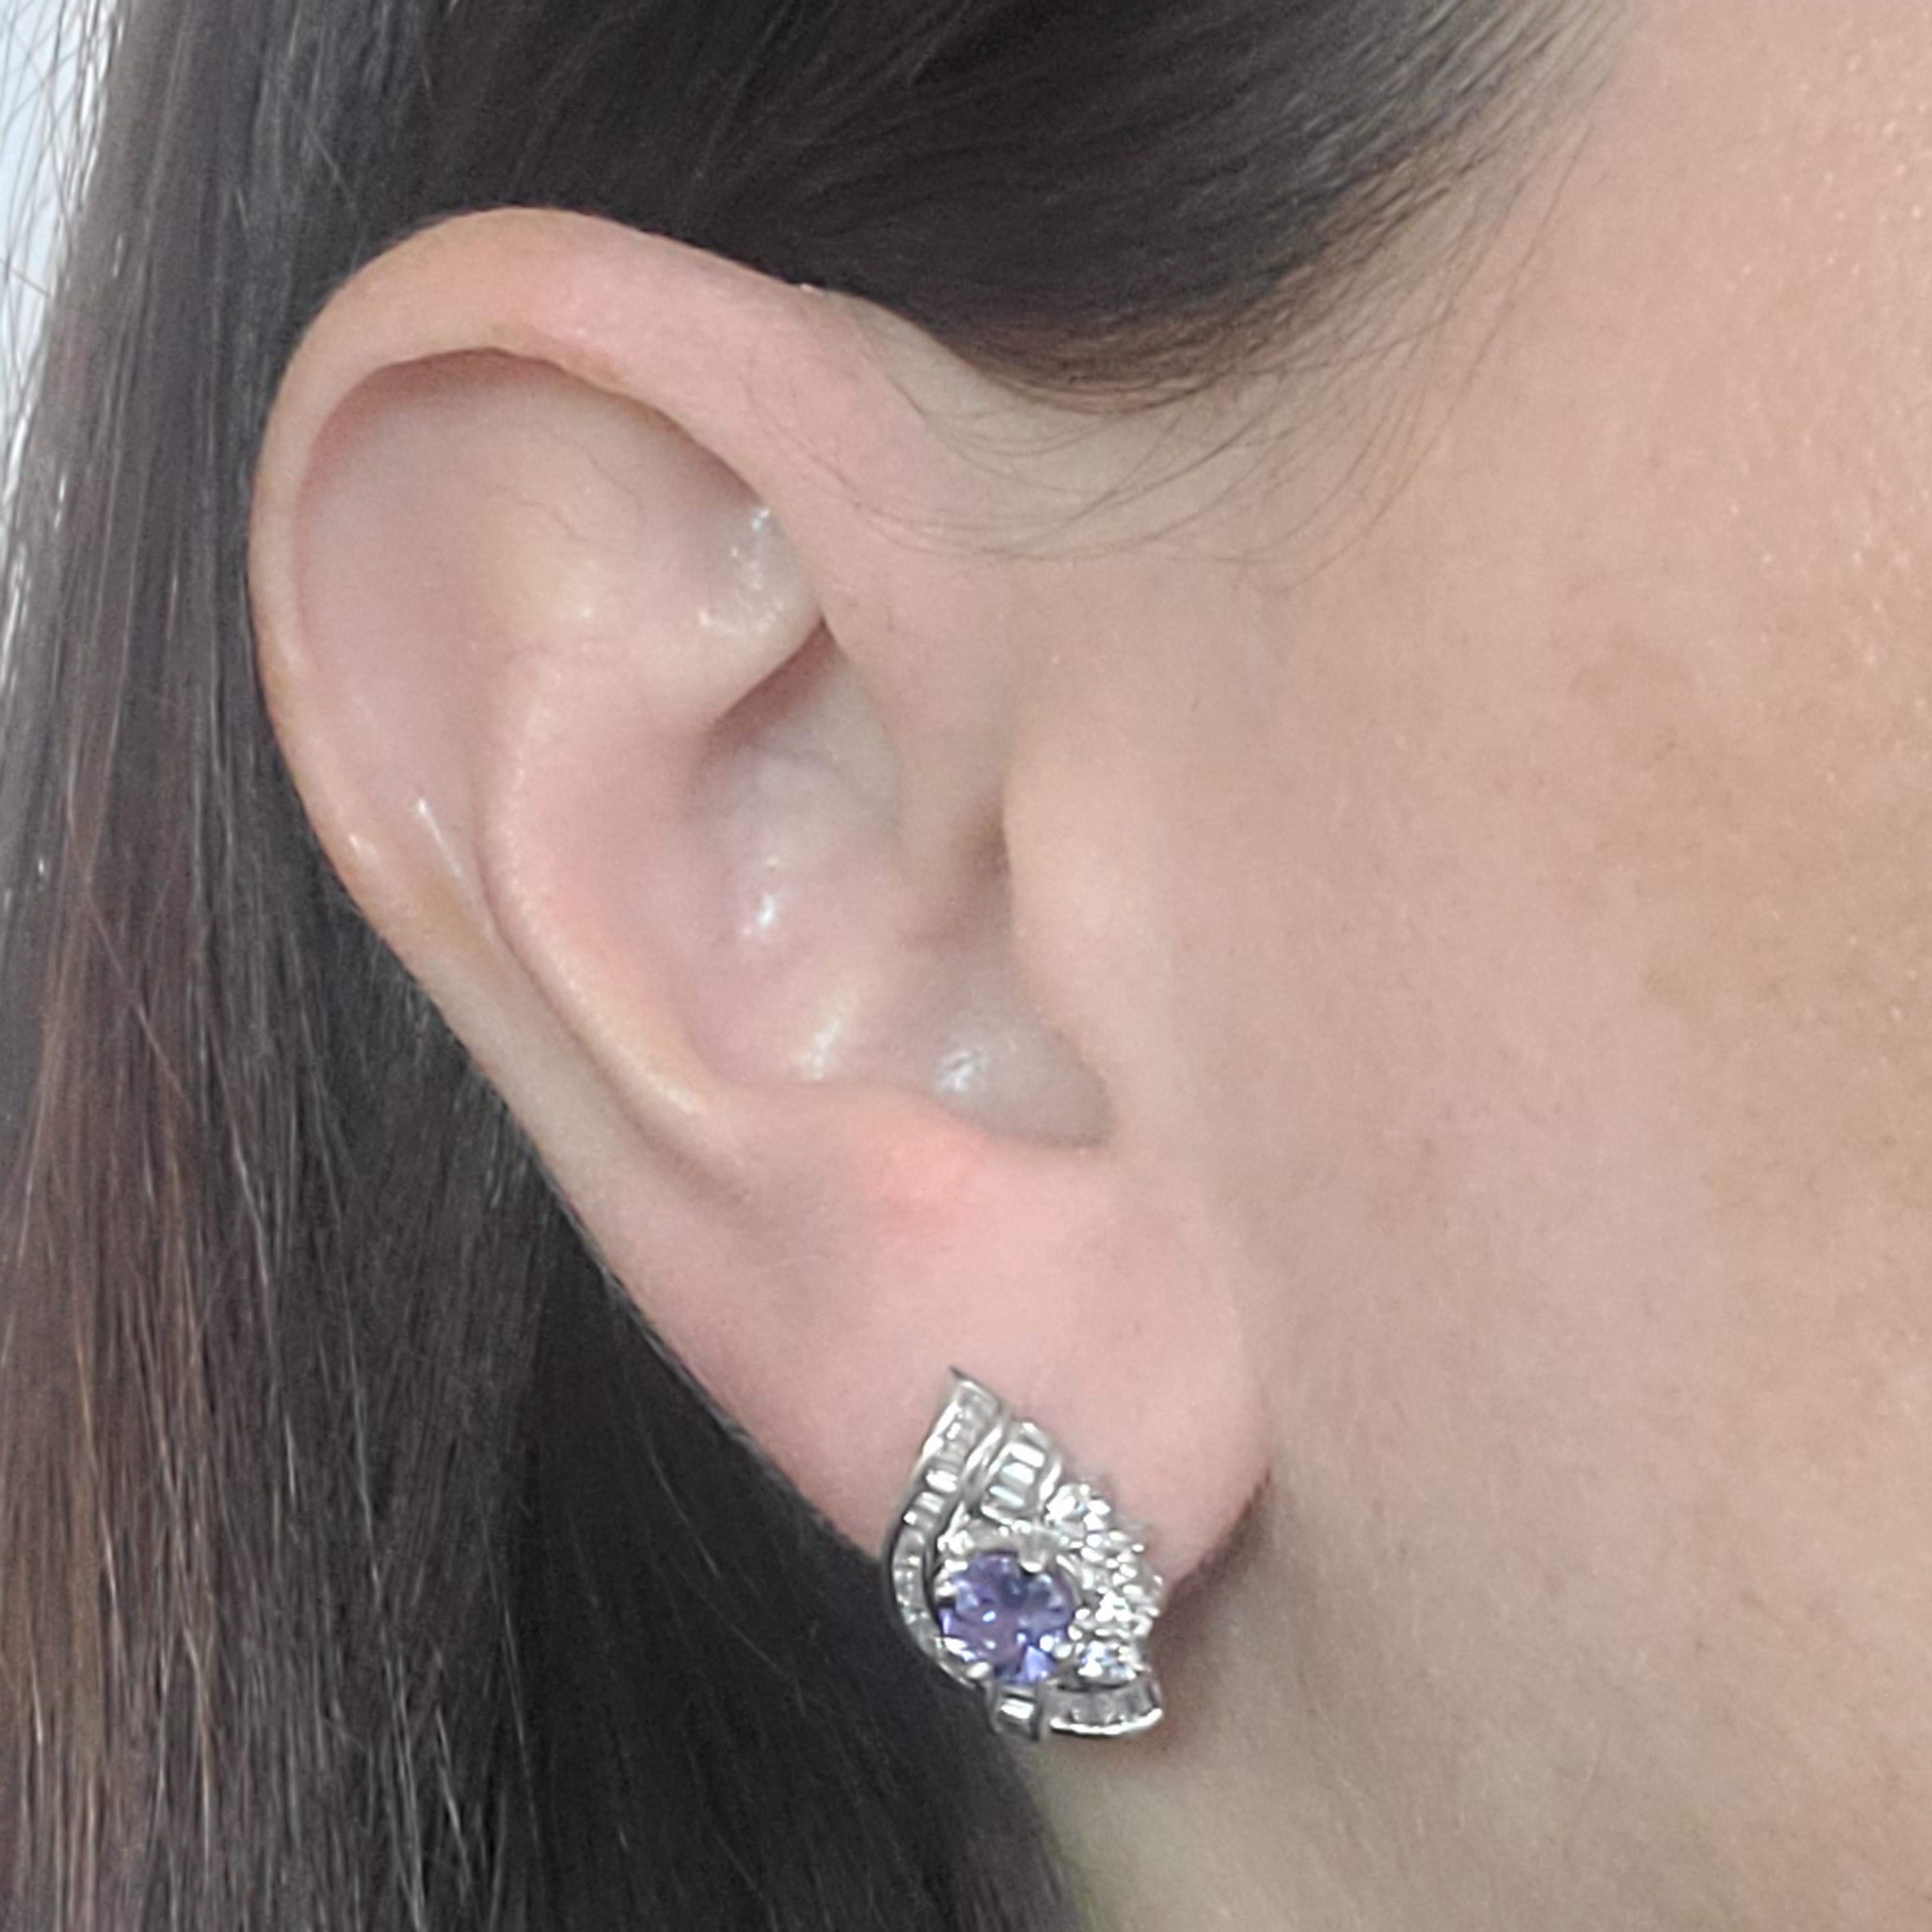 18 Karat White Gold Stud Earrings Featuring 2 Round Tanzanites Totaling Approximately 1 Carat, Accented By 58 Round and Baguette Cut Diamonds of VS Clarity and G/H Color Totaling Approximately 1 Carat. Pierced Post with Friction Back. Finished